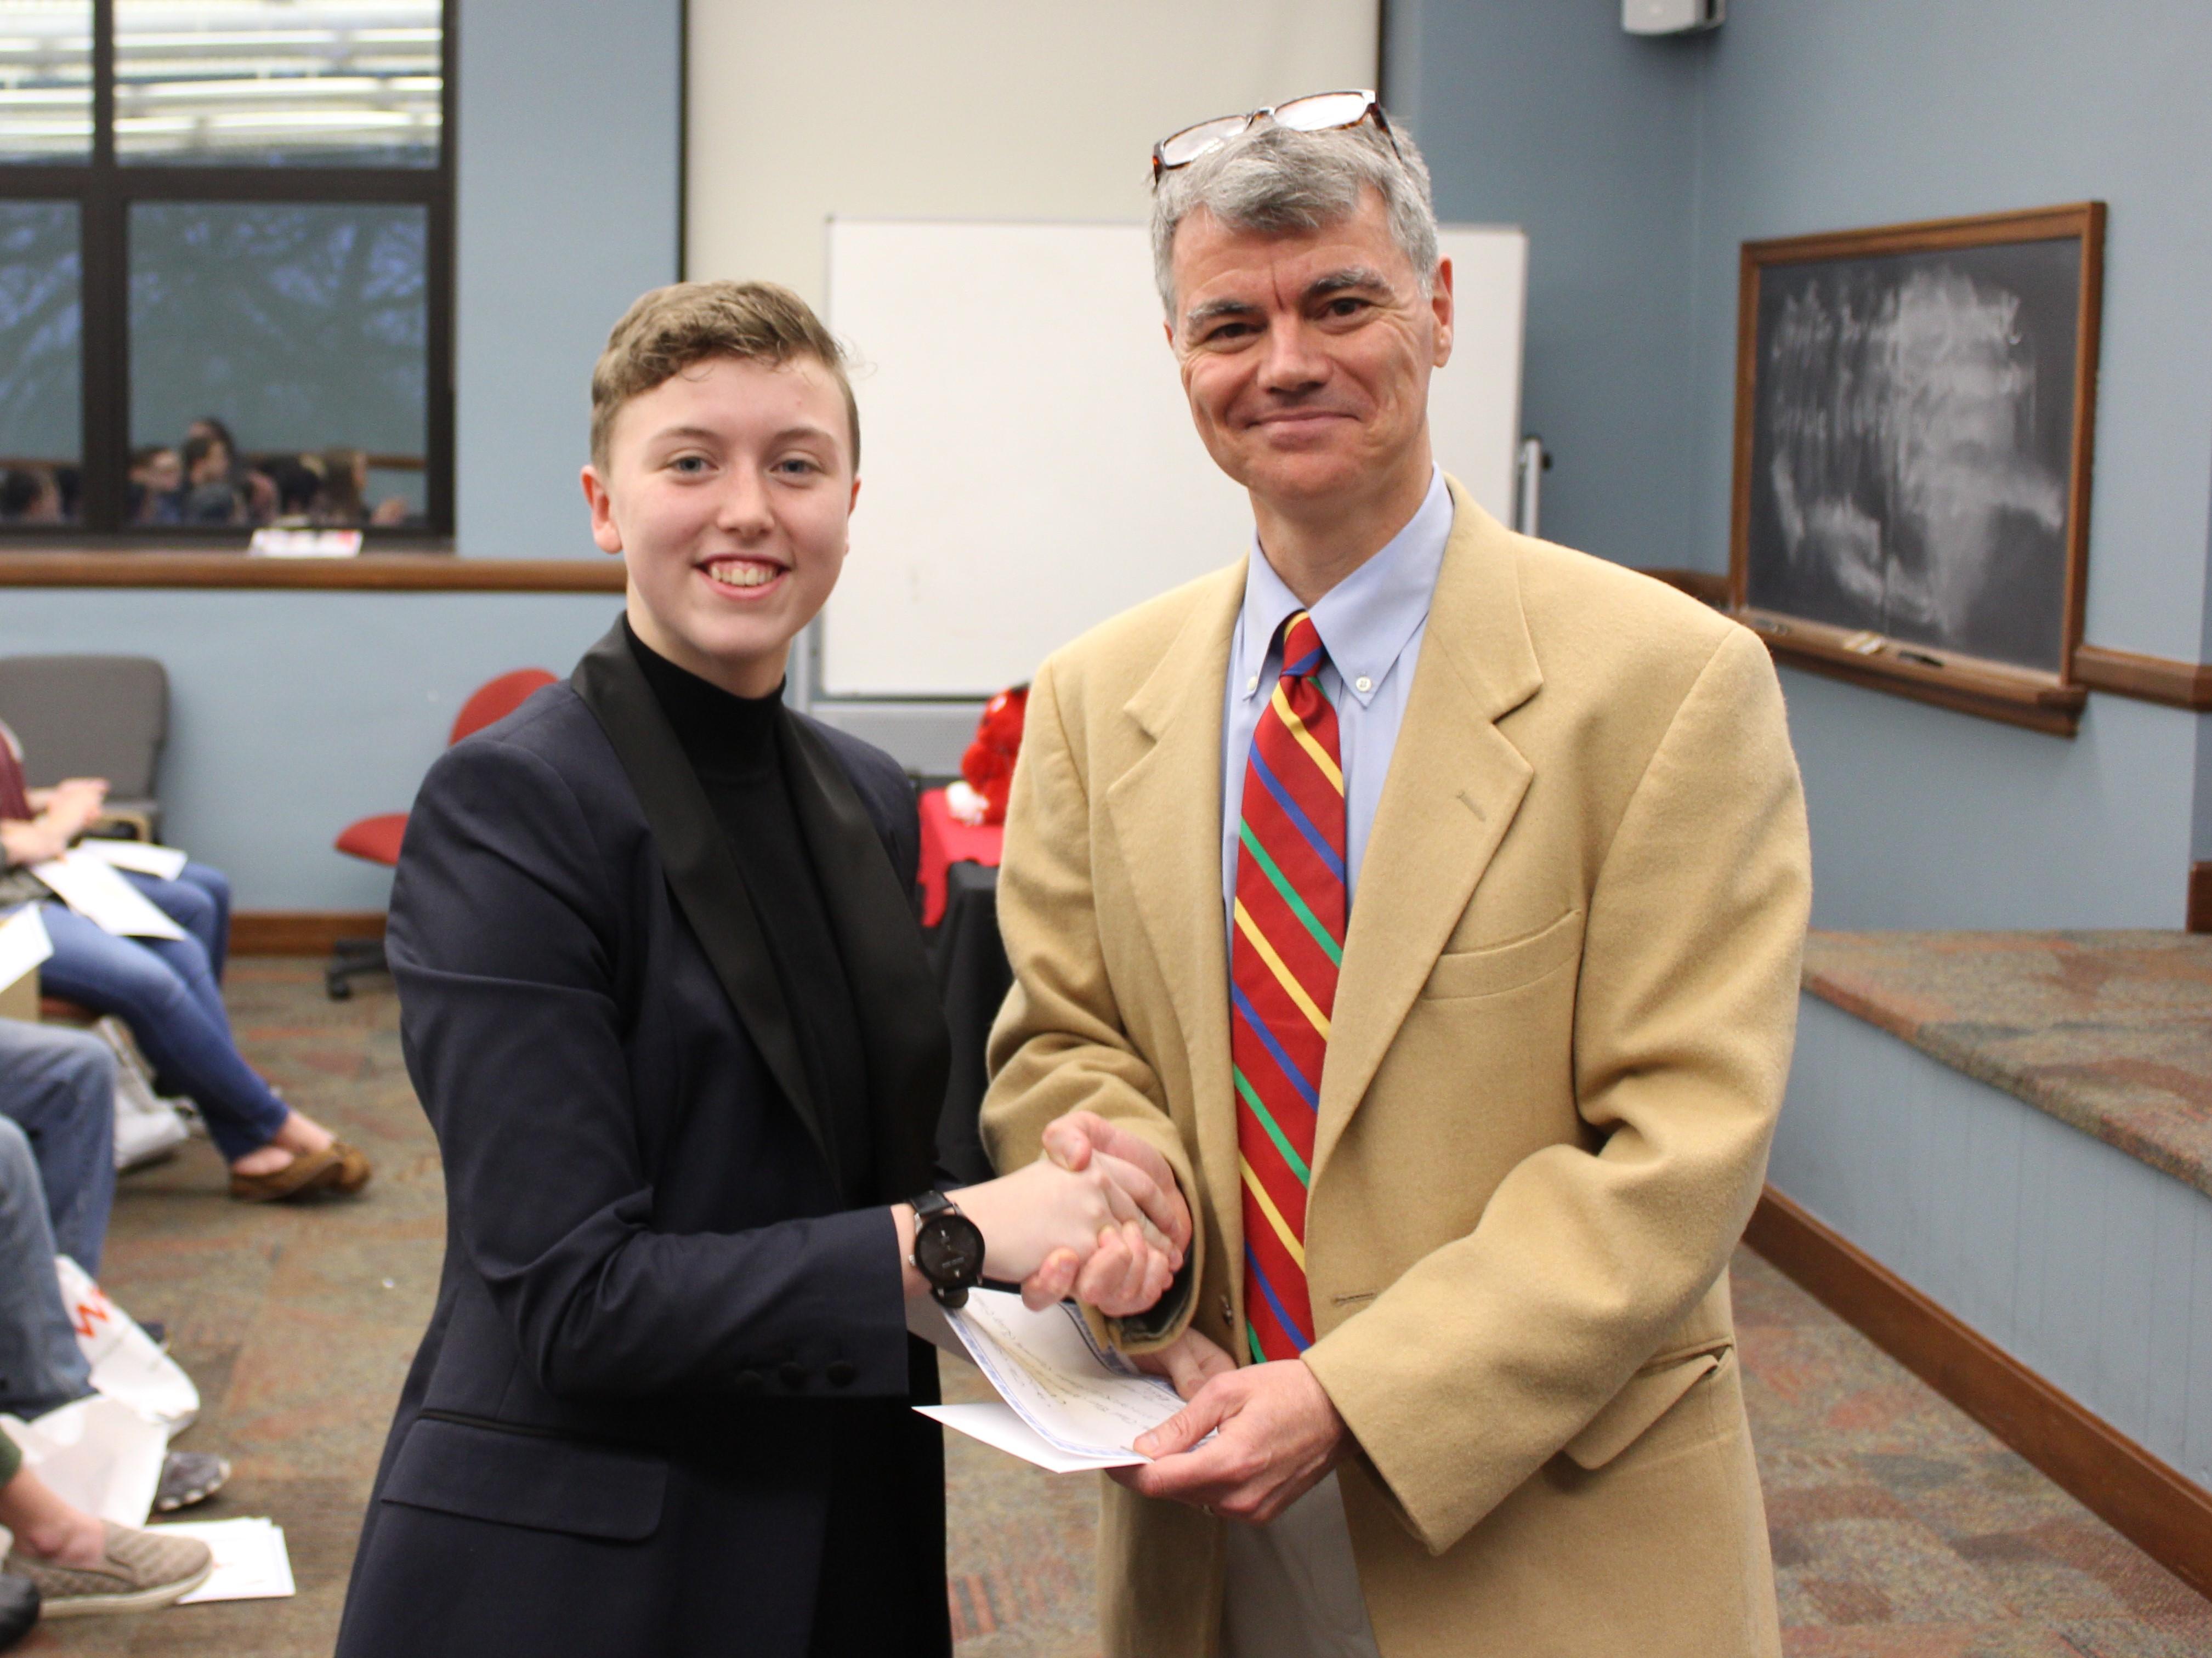 Dr. Hale shaking hands with 3rd place winner in Creative Writing, Shelby Beaty